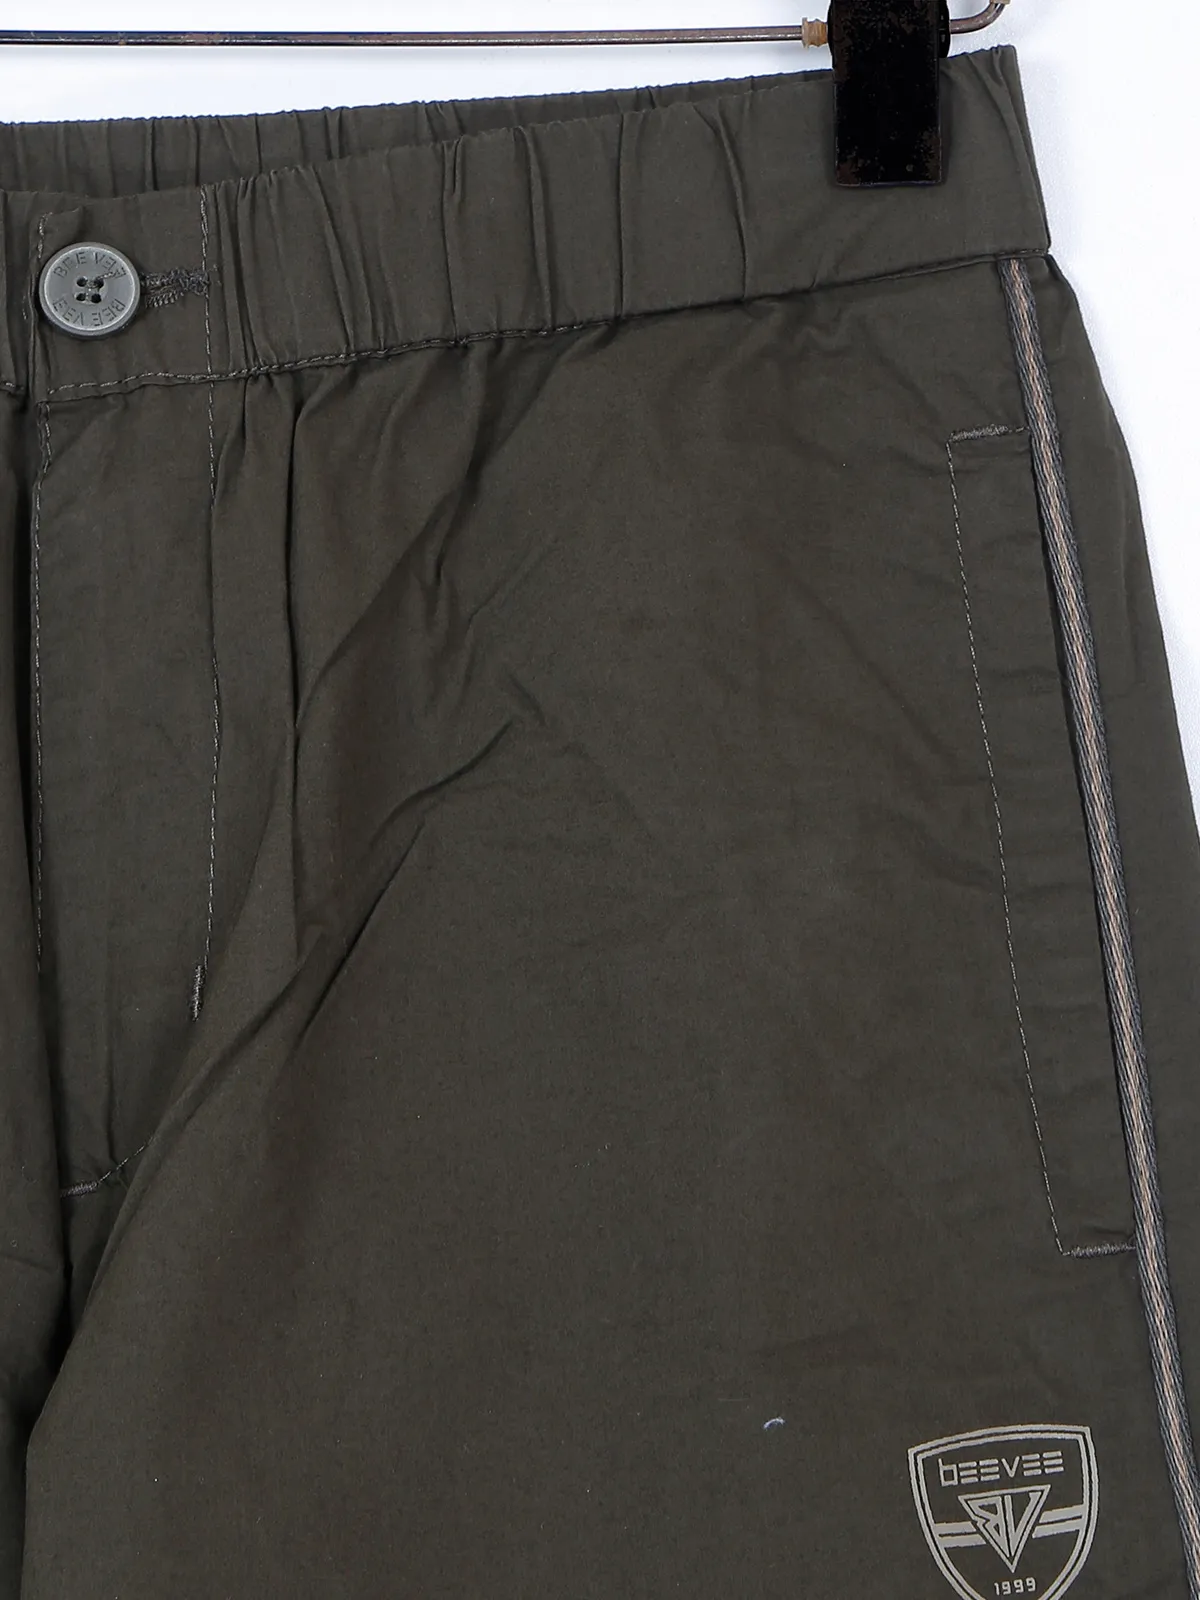 Beevee olive cotton track pant